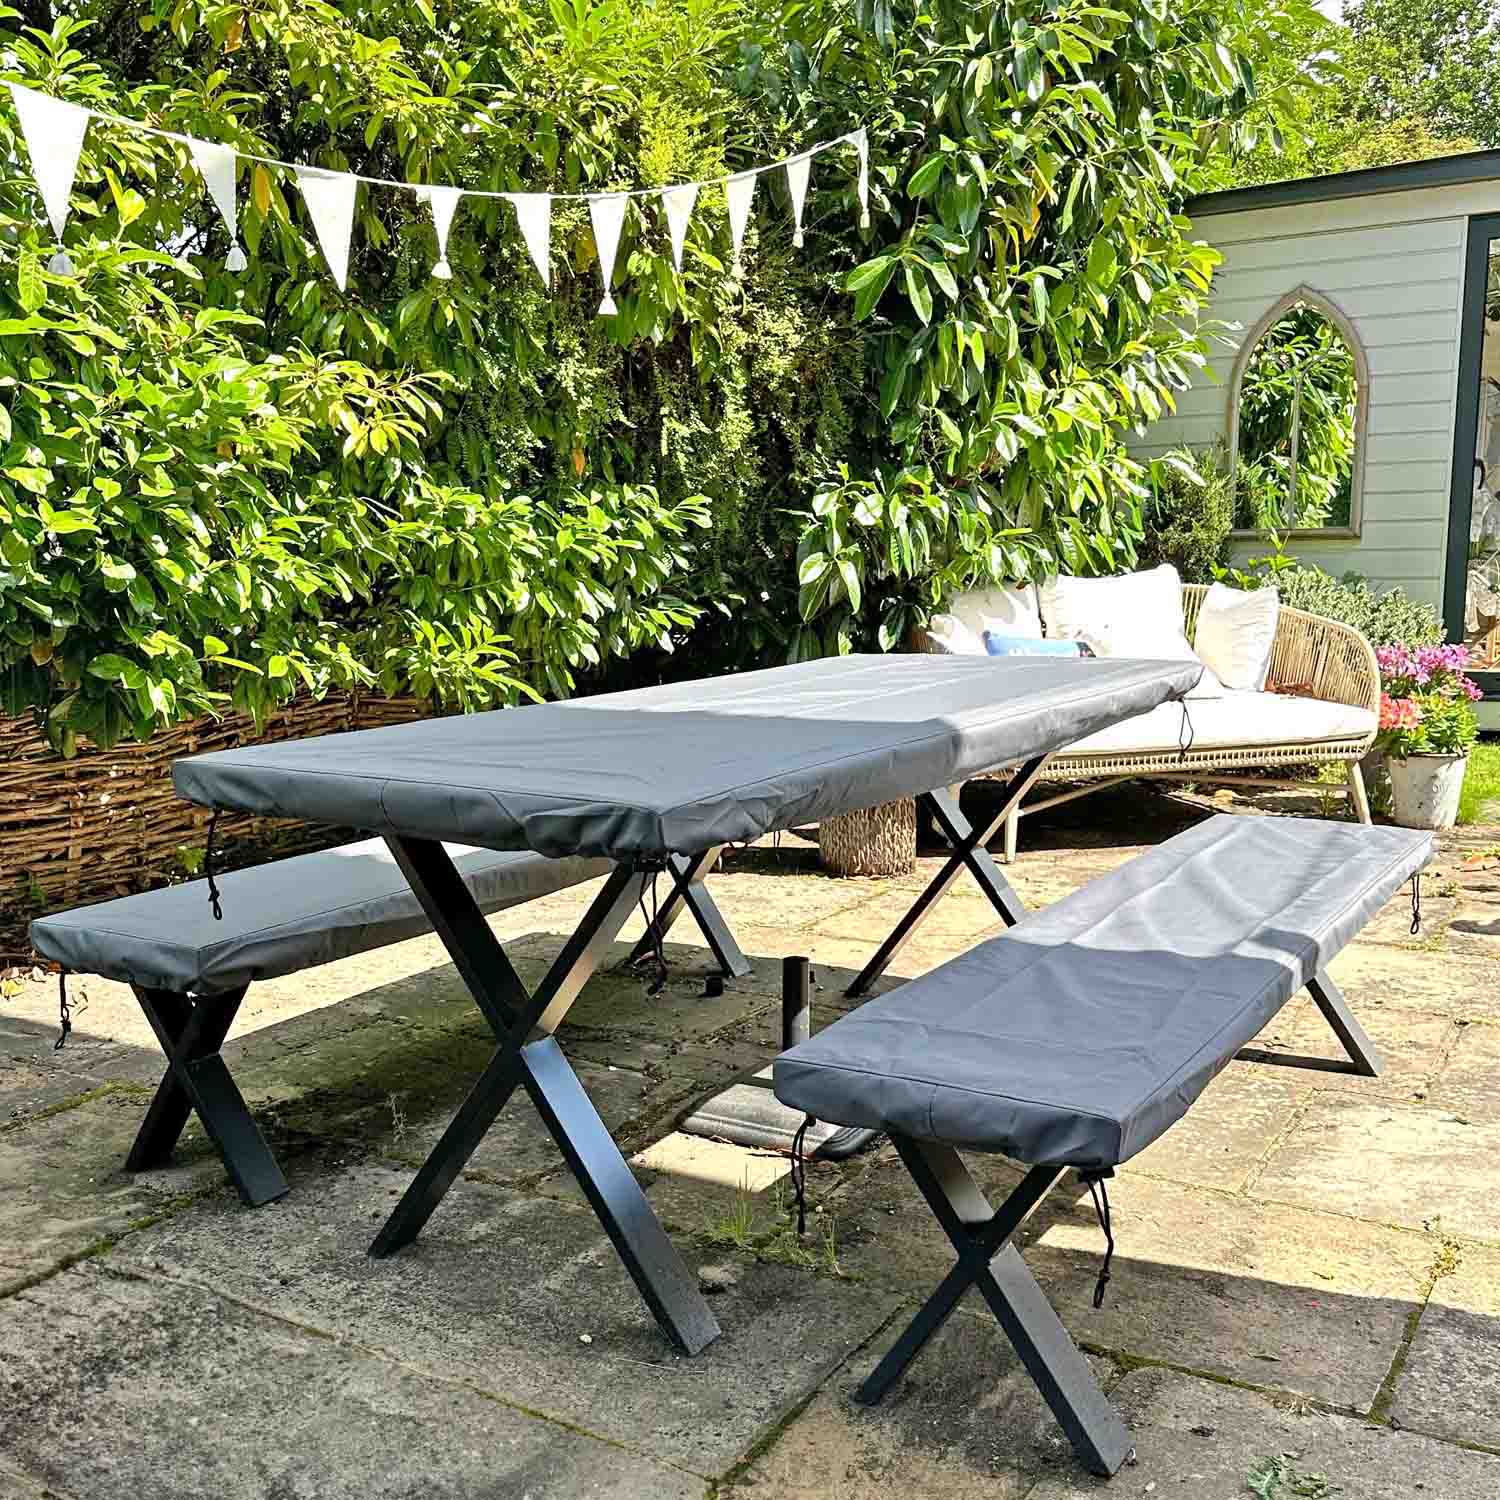 Garden Bench Covers - 4 Foot Bench Cover